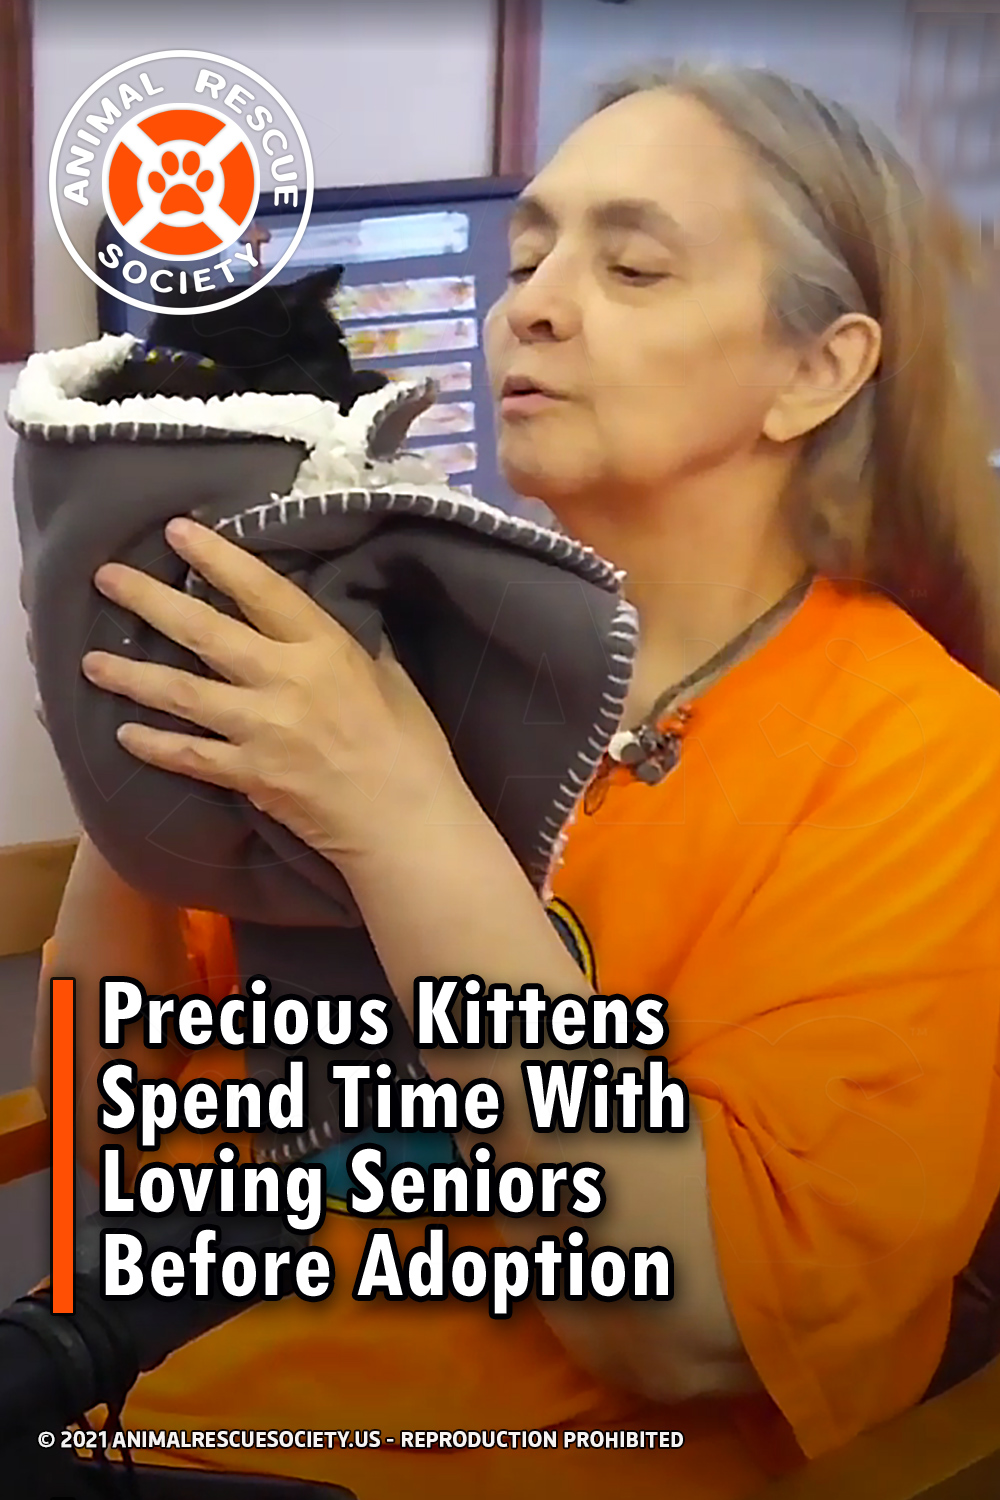 Precious Kittens Spend Time With Loving Seniors Before Adoption